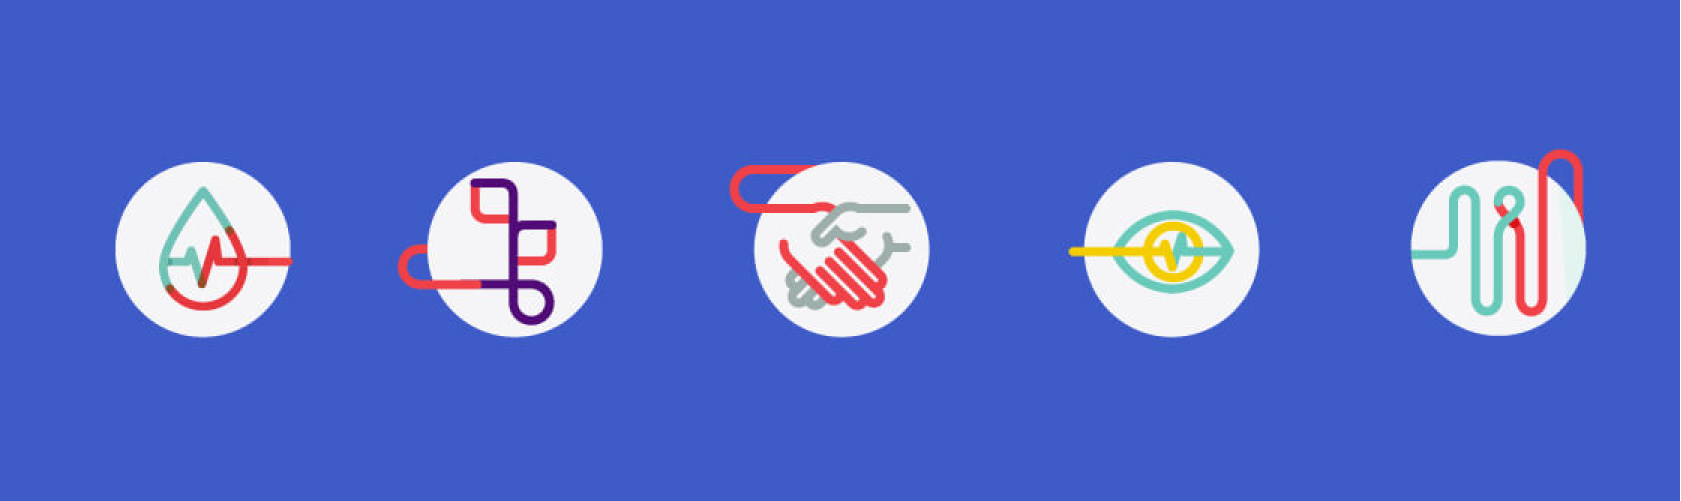 Icons depicting a blood drip, a plant, a handshake, an eye, and an IV. All in the brand style.